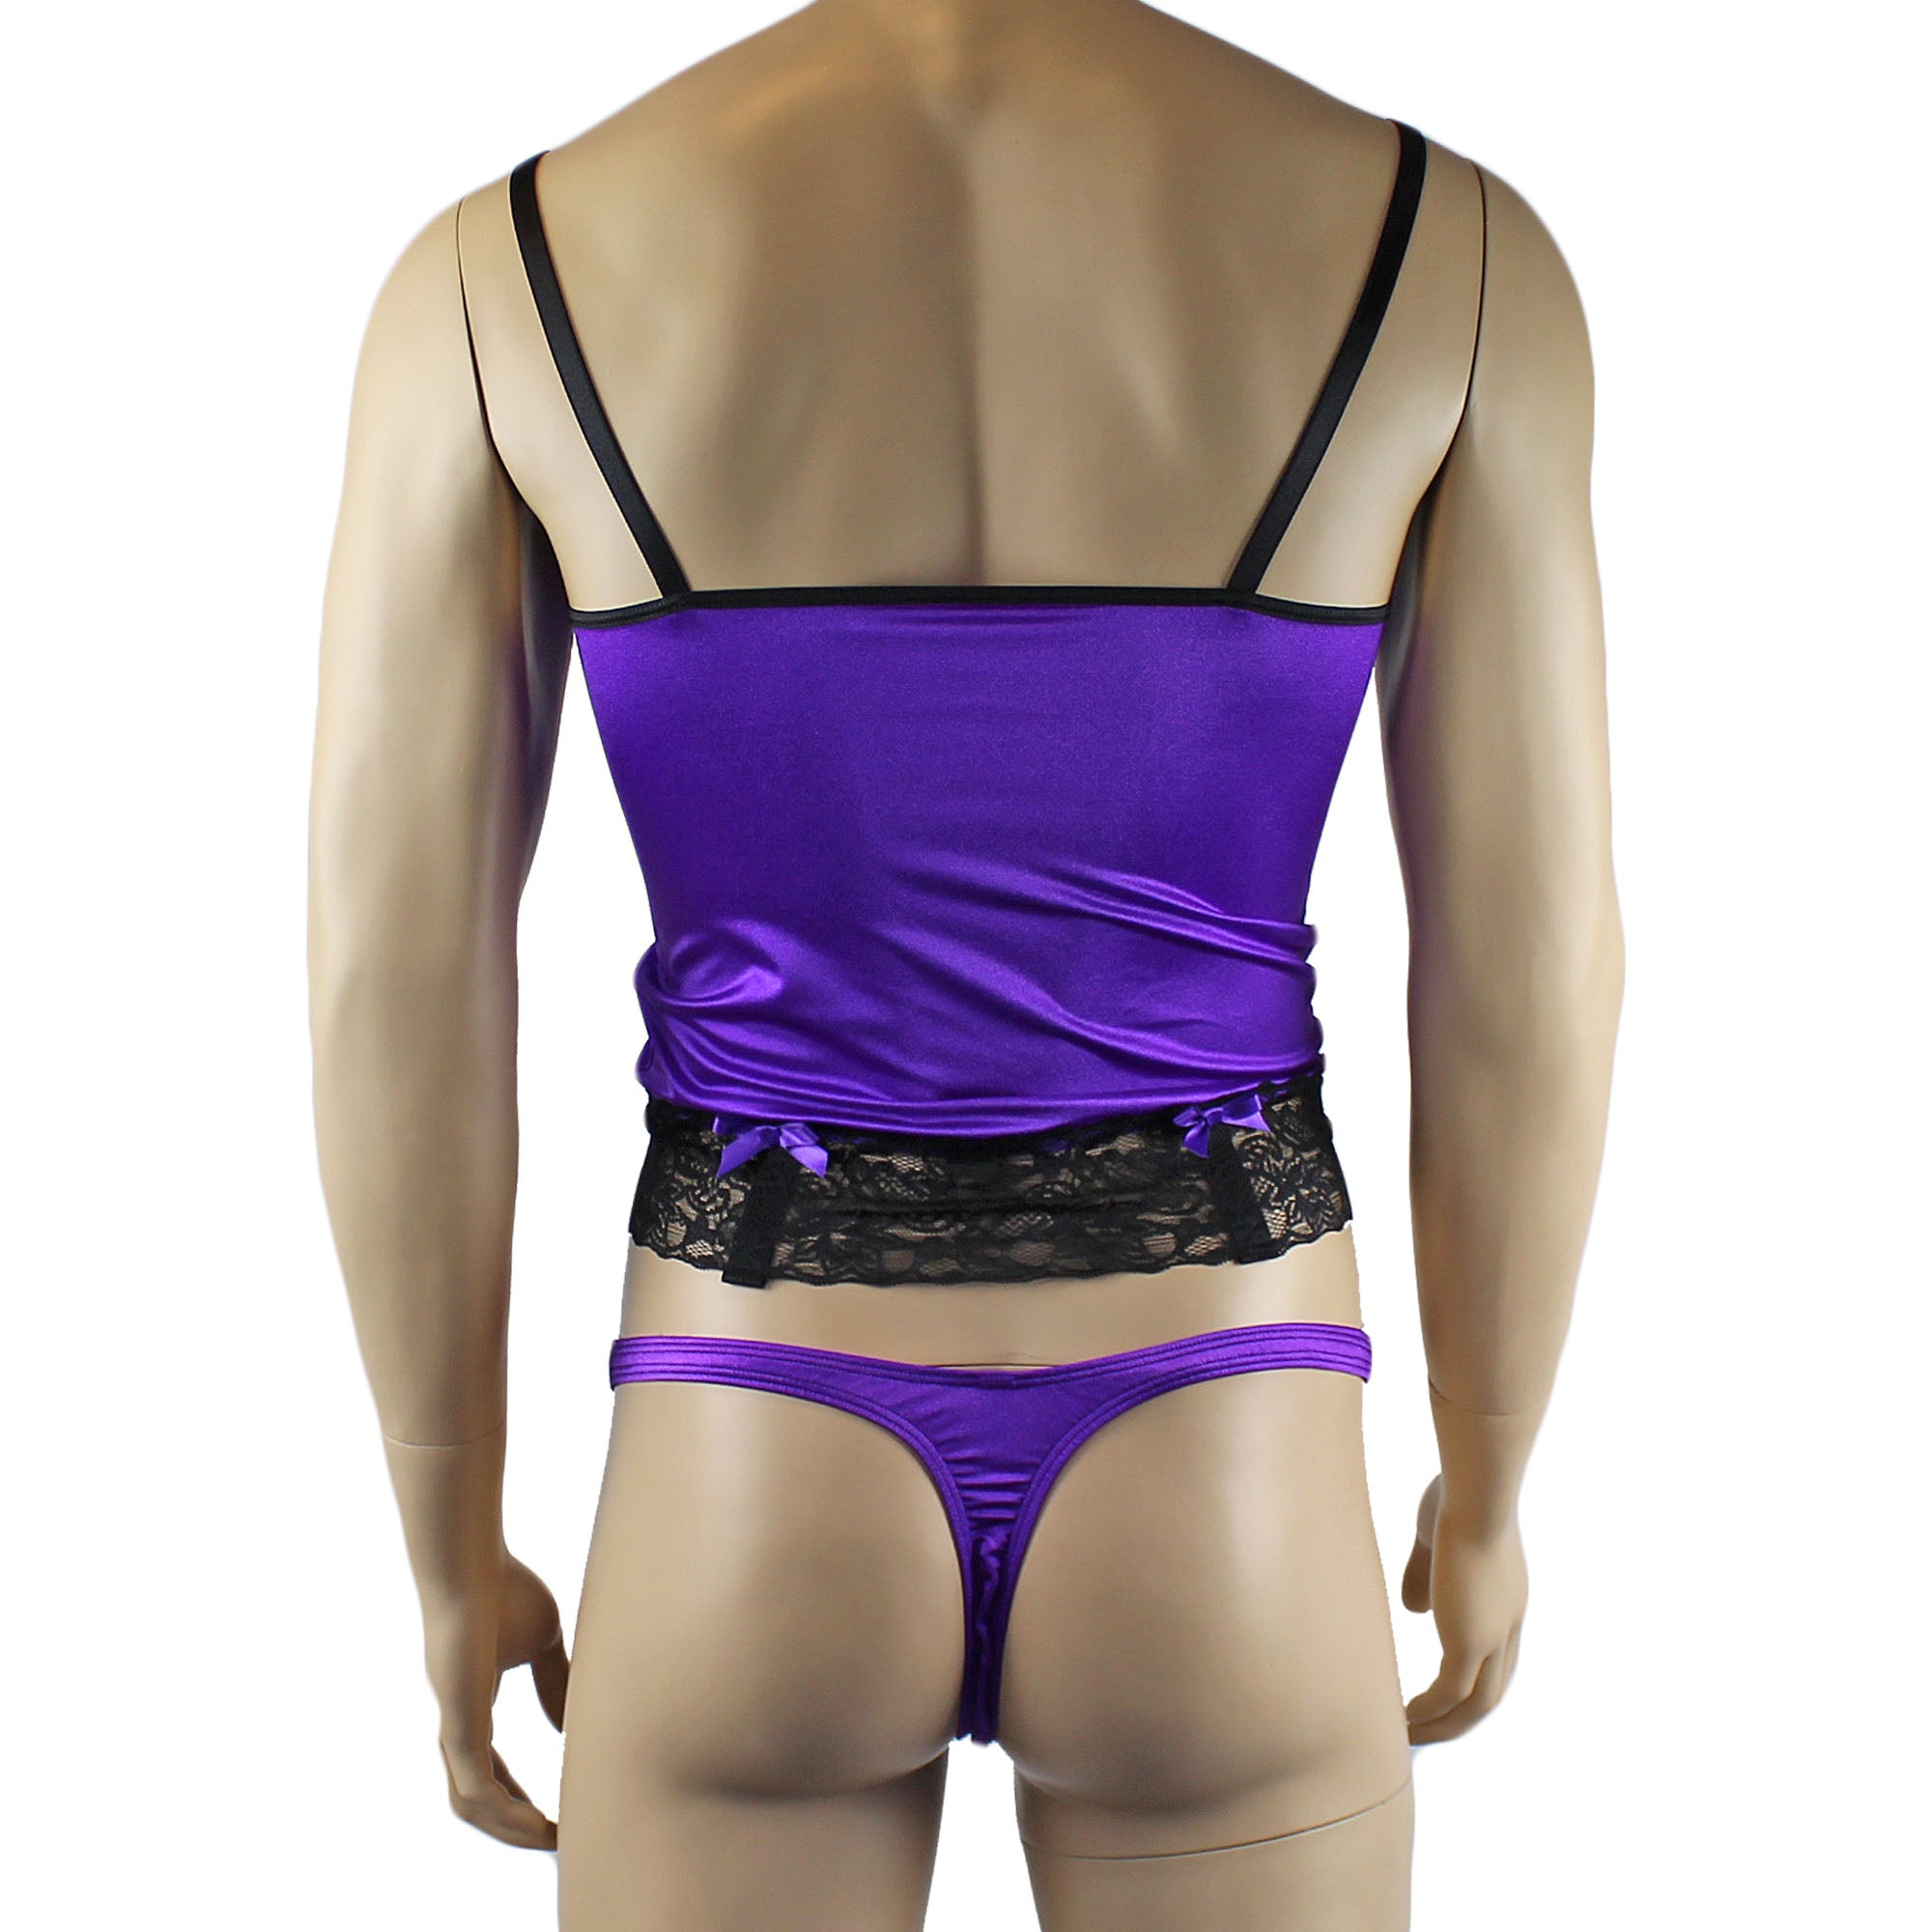 Mens Joanne Camisole Bustier Garter Top with Thong & Stockings - Sizes up to 3XL Purple and Black Lace